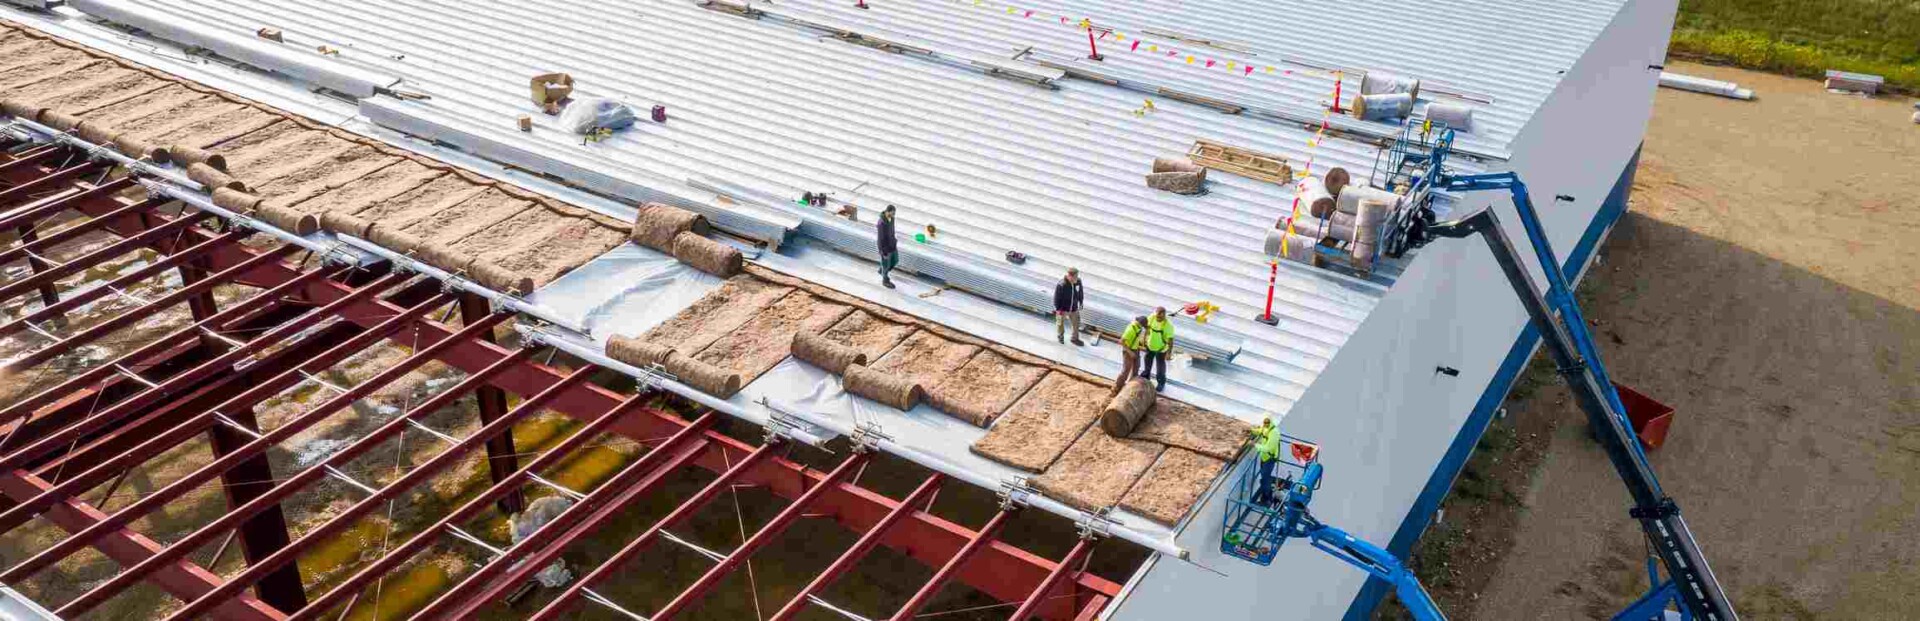 Roofers working on commercial roof installation